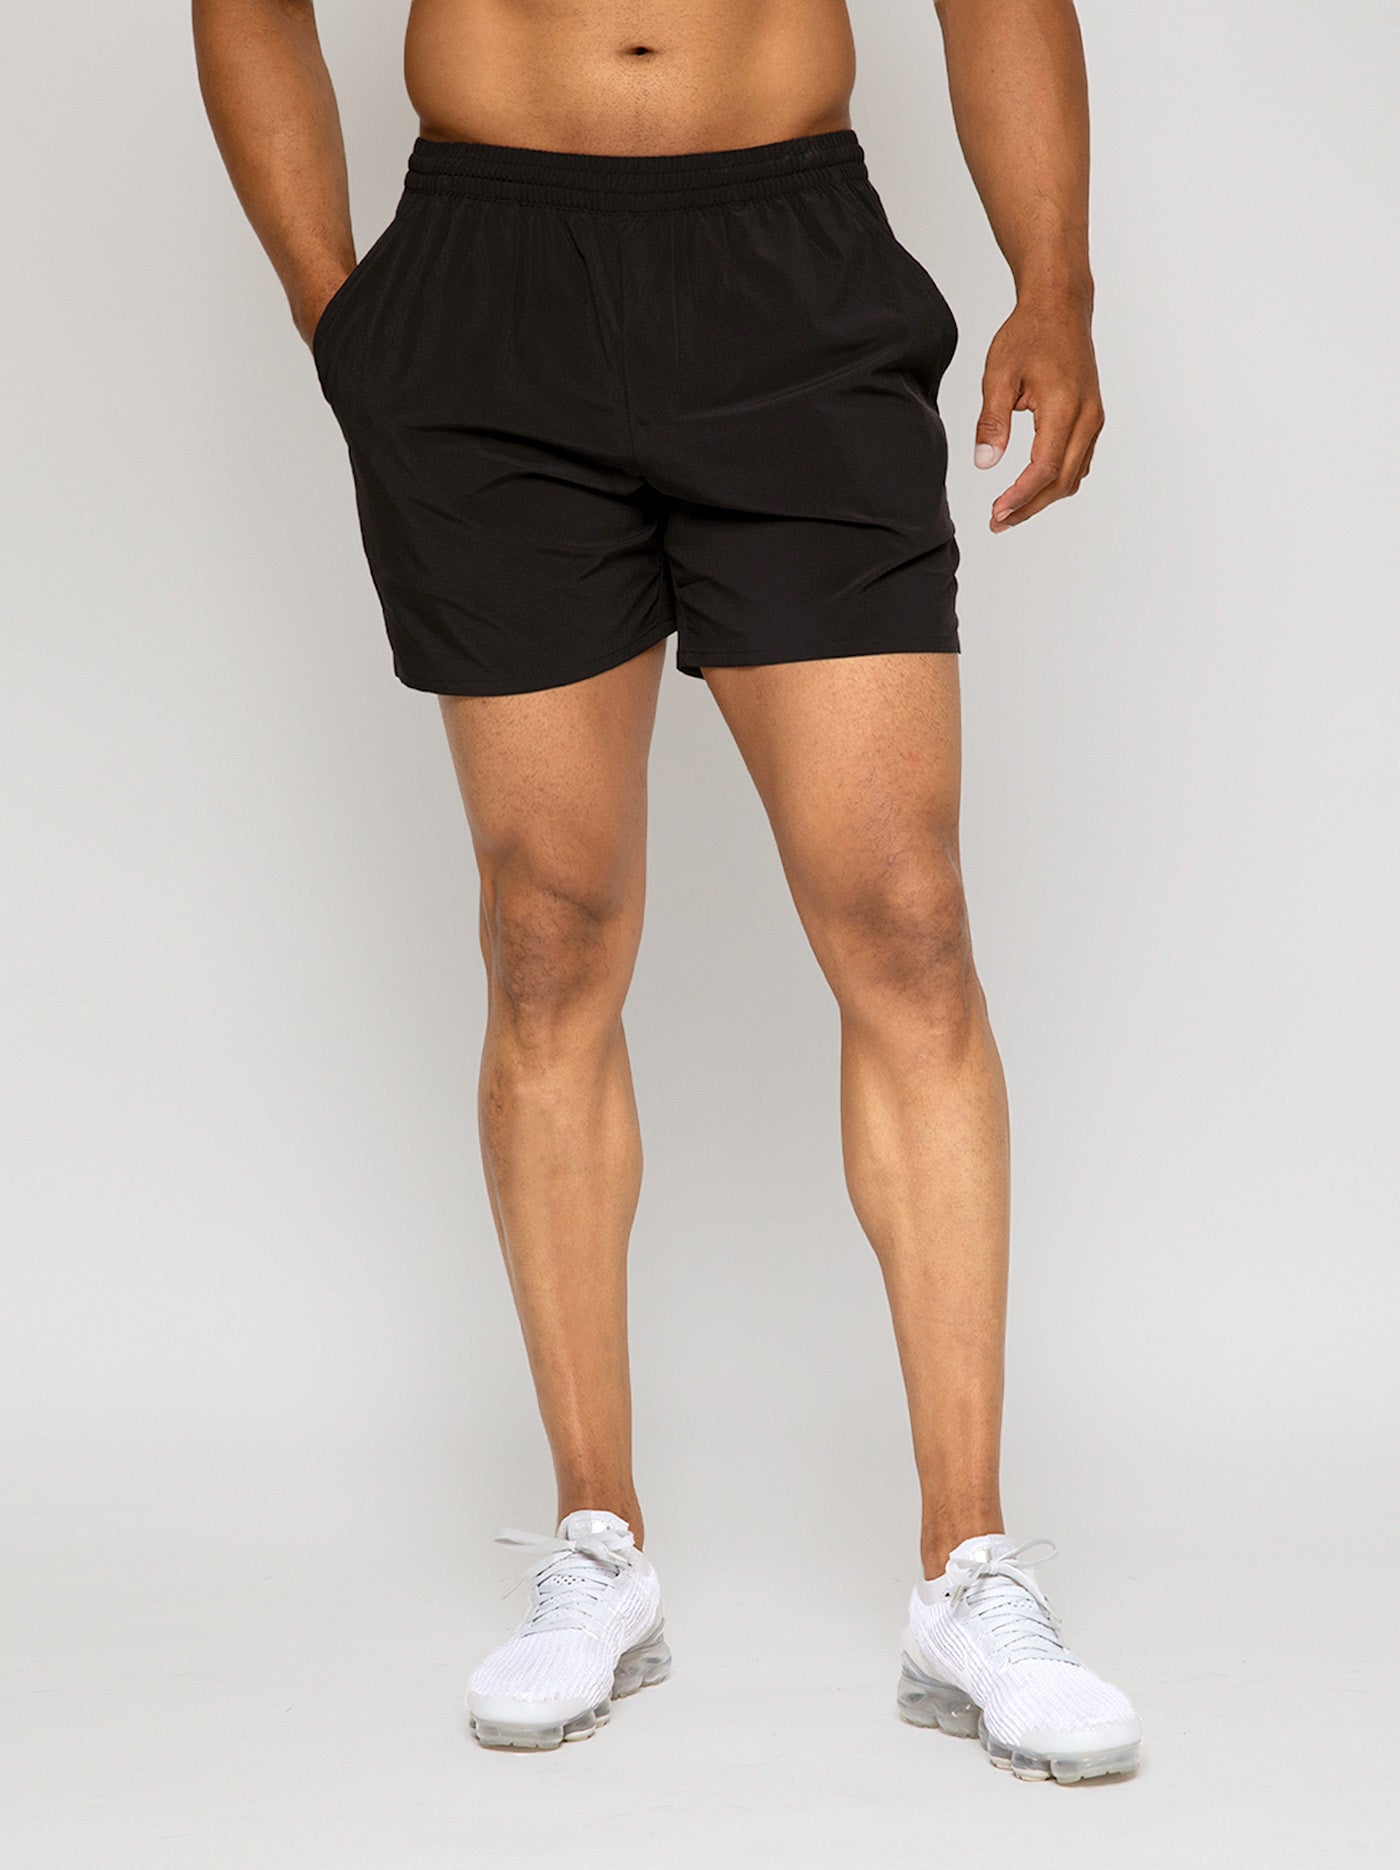 NewArrival Our popular #AIRism biker shorts now come in shorter 6” inseam  length! A comfortable fit perfect for exercising or everyday